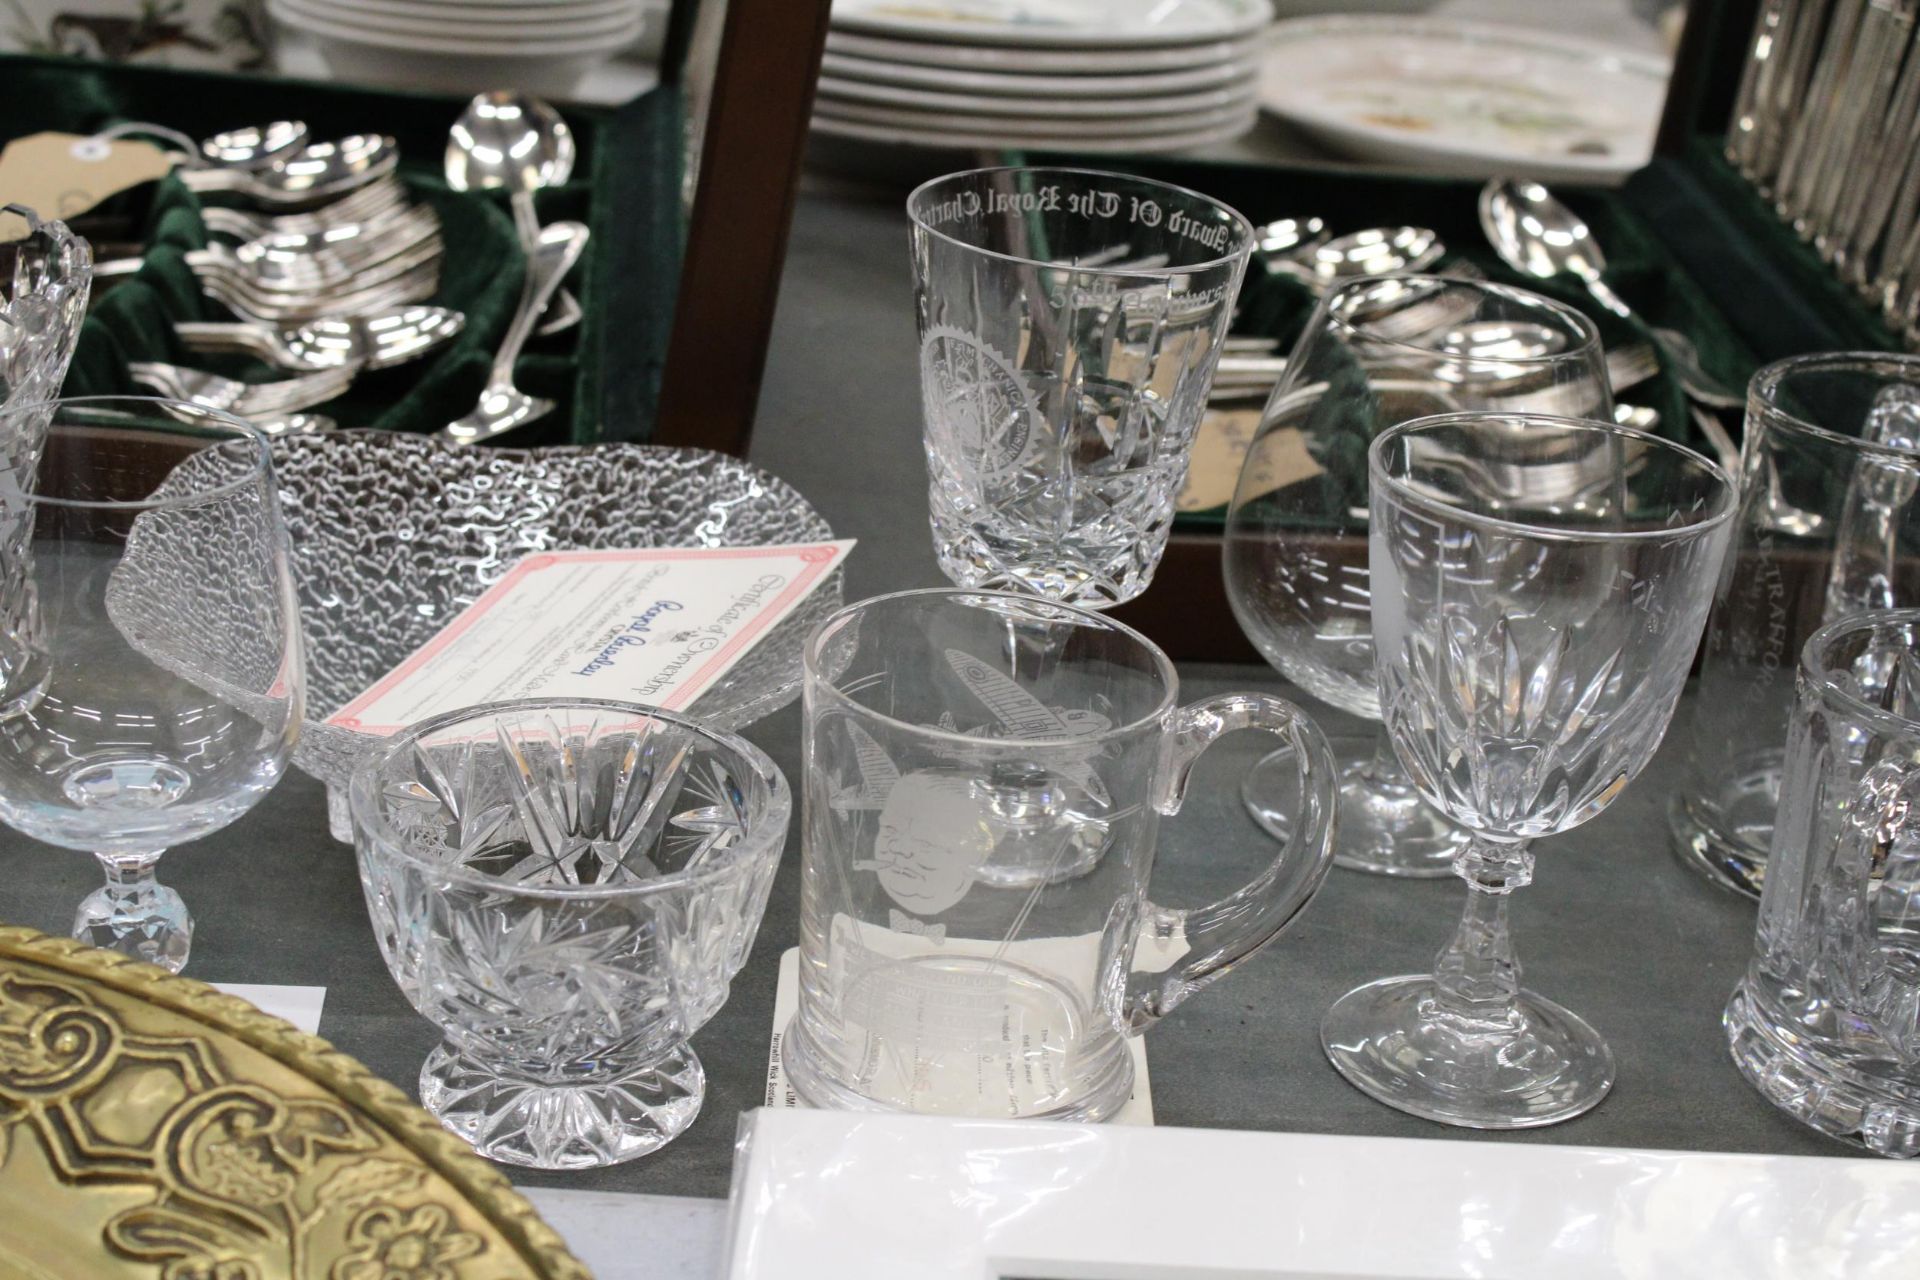 A LARGE QUANTITY OF GLASSWARE TO INCLUDE BOWLS, TANKARDS, VASES, KNIFE RESTS, WINE GLASSES - Image 5 of 9